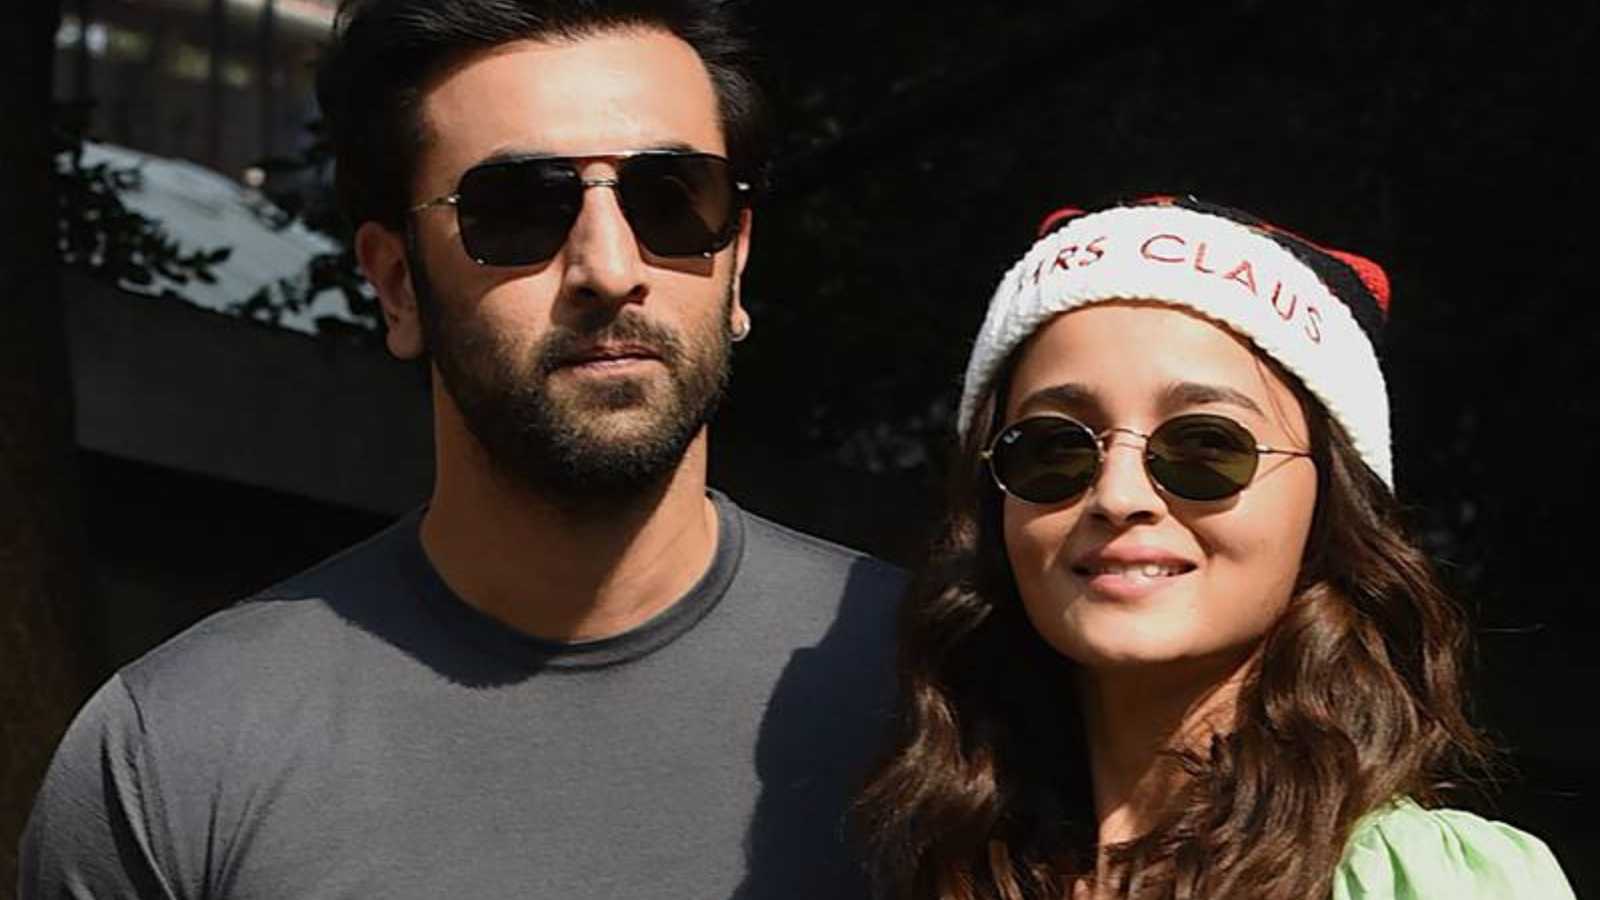 Alia Bhatt left stumped when asked why Ranbir Kapoor has a 'serious look' in many of their pictures together: 'Does he smile at home?'